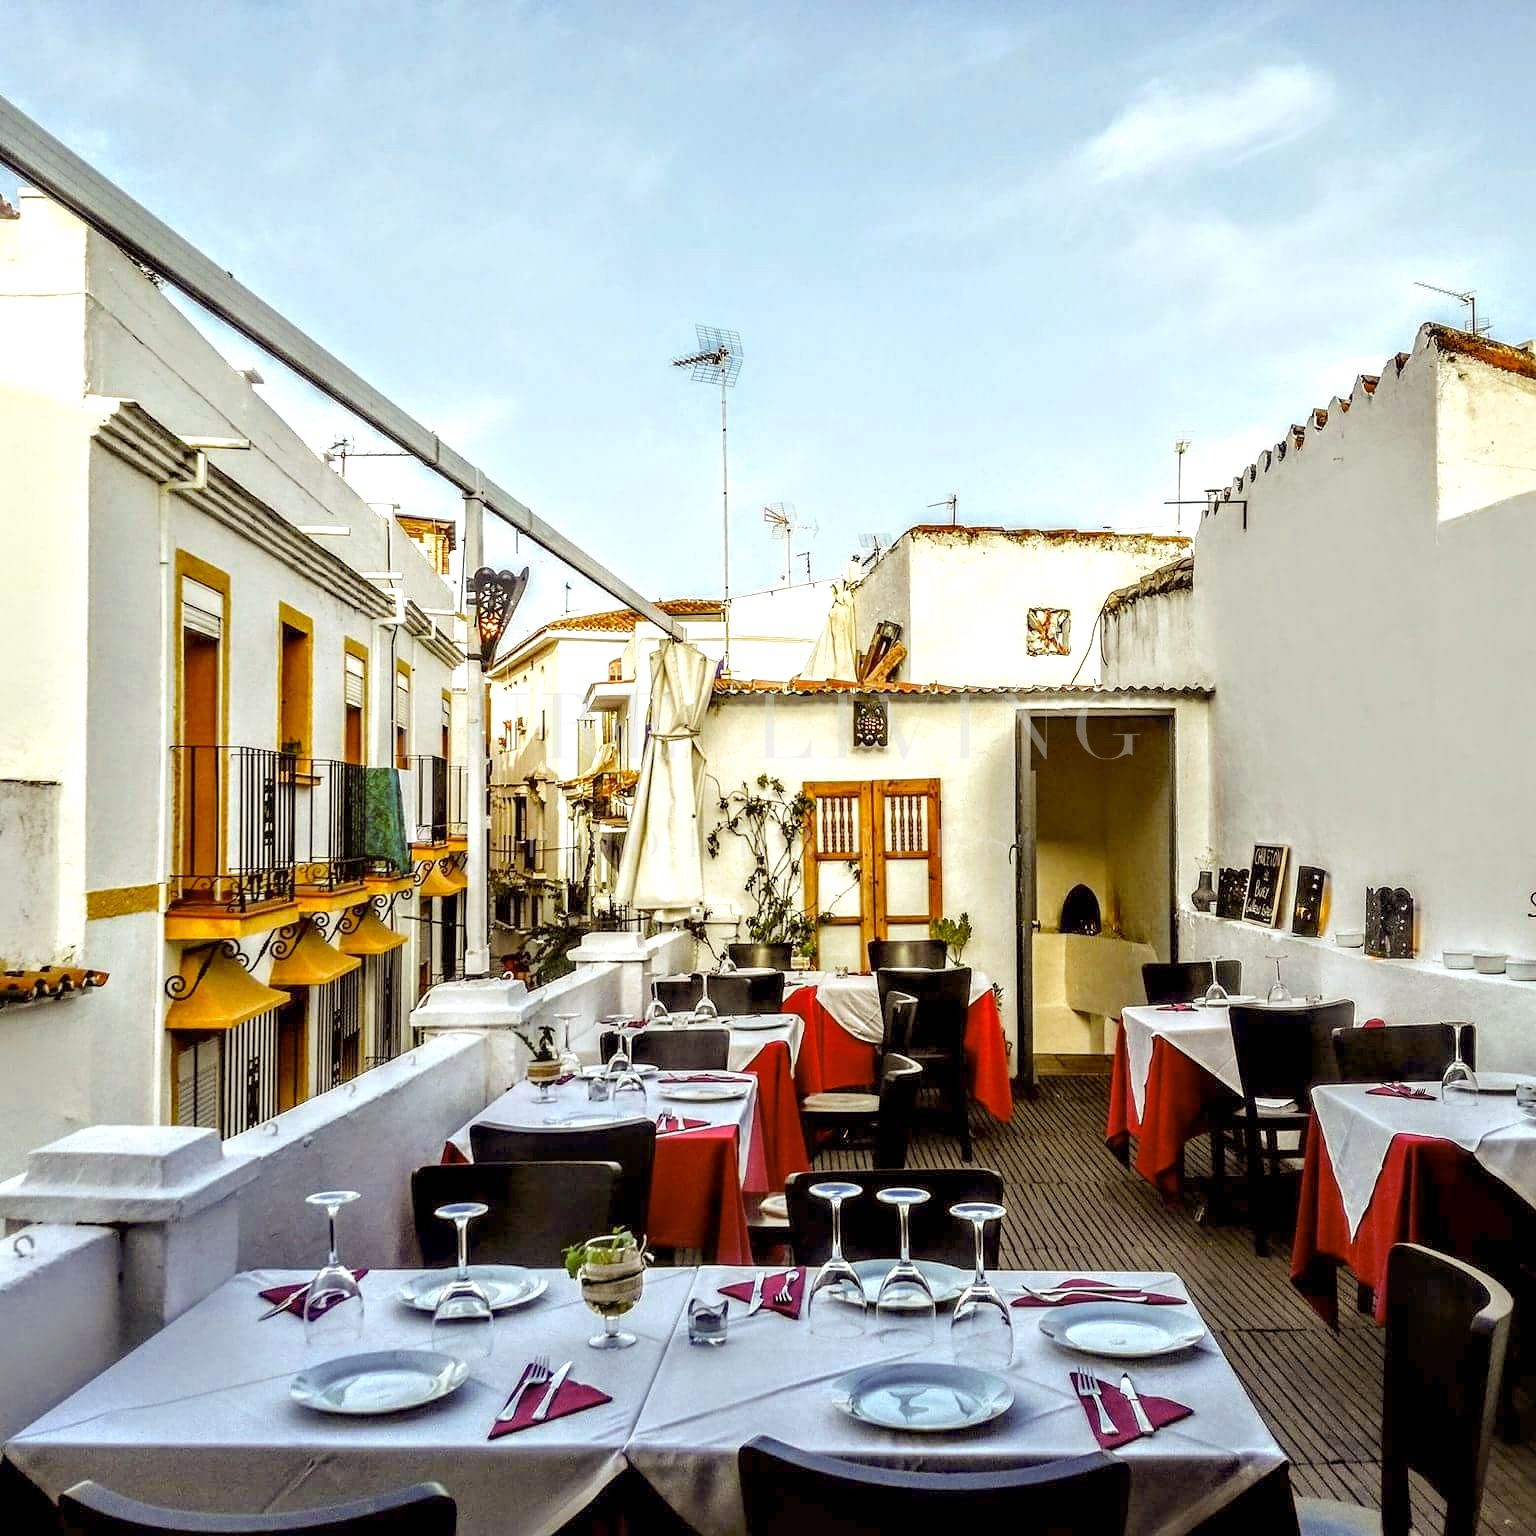 Restaurant with a large terrace in the old town of Marbella